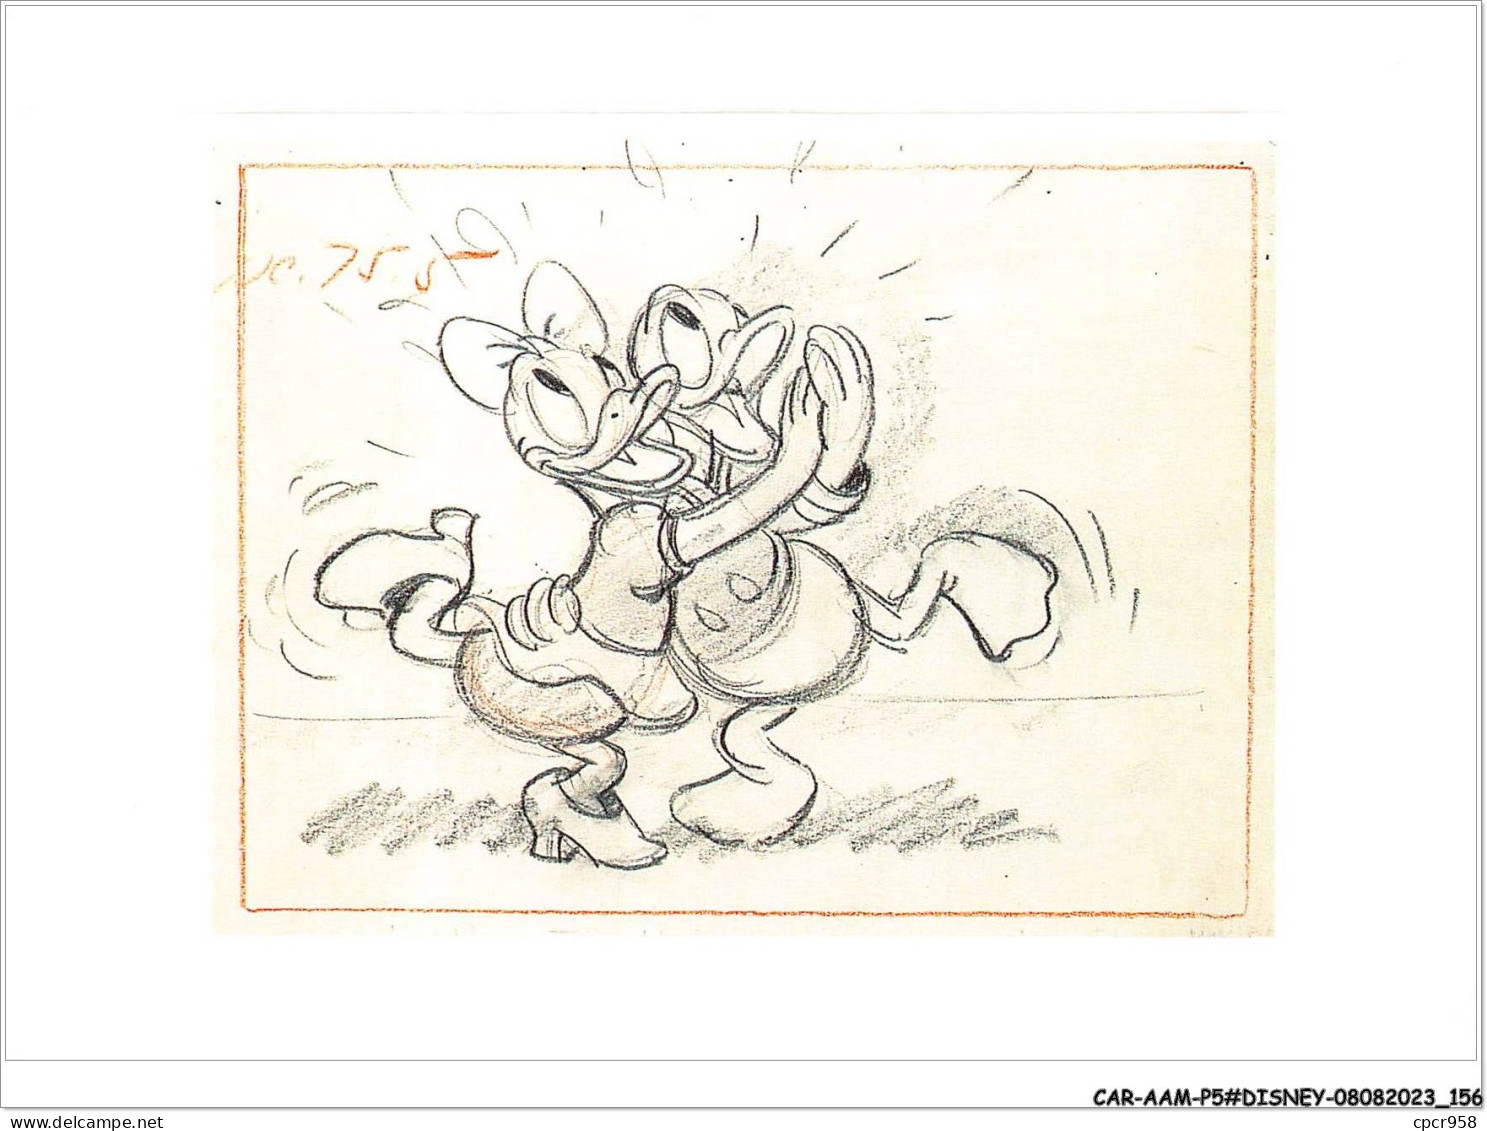 CAR-AAMP5-DISNEY-0486 - Donald - Original Story Sketch Of Daisy And Donald Duck - Mr Duck Steps Out - Disneyland